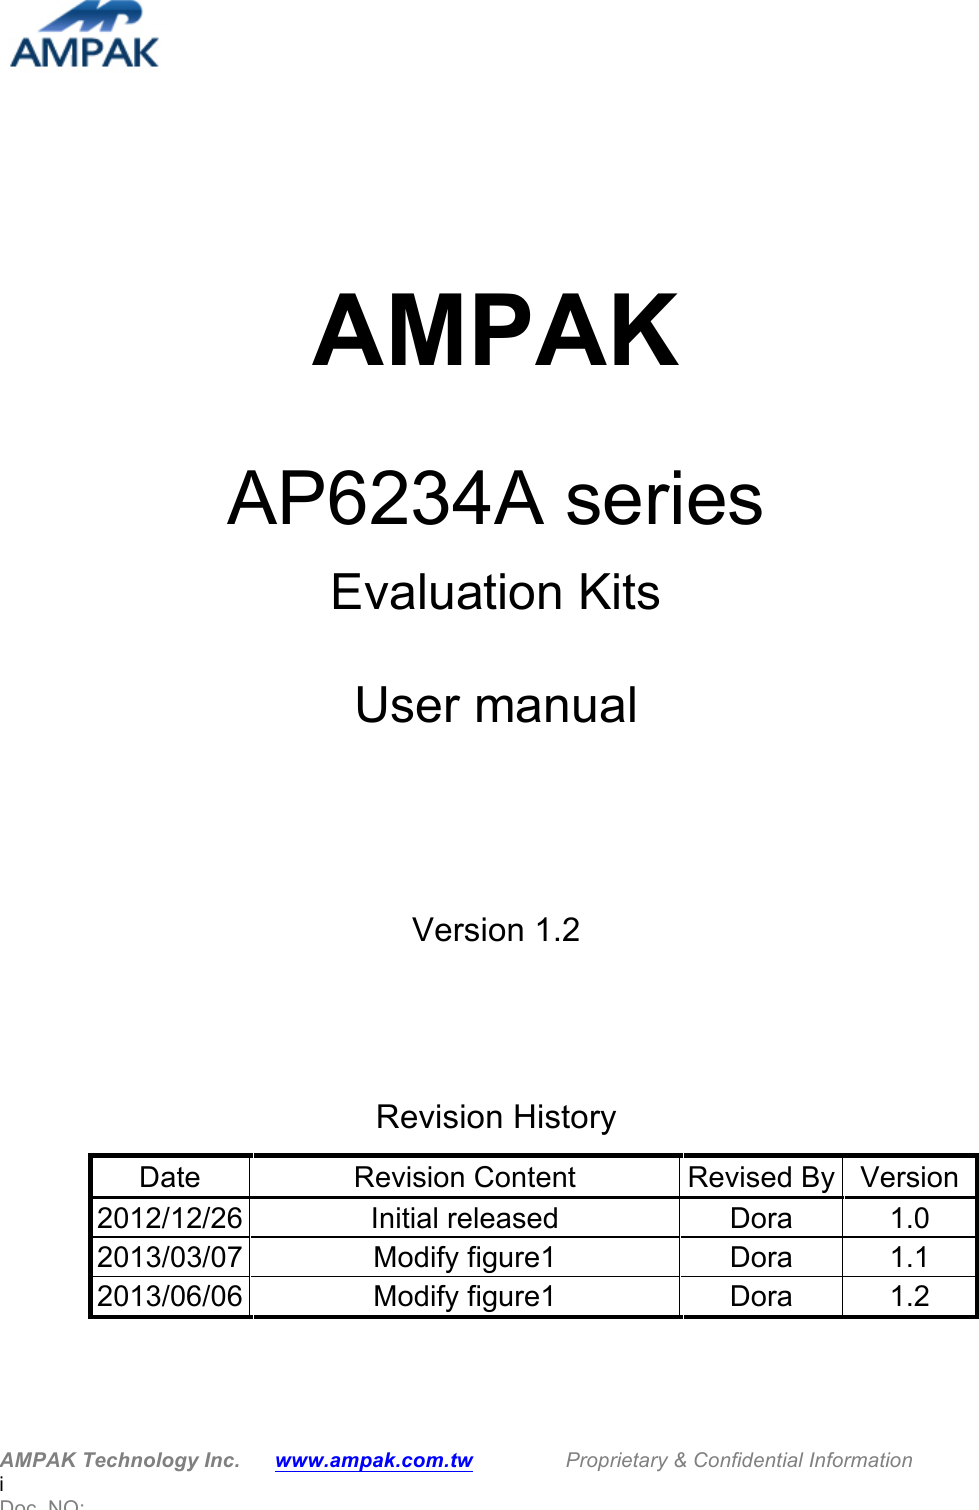  AMPAK Technology Inc.   www.ampak.com.tw        Proprietary &amp; Confidential Information    i Doc. NO:          AMPAK  AP6234A series Evaluation Kits  User manual   Version 1.2      Revision History Date Revision Content Revised By Version 2012/12/26 Initial released   Dora 1.0 2013/03/07 Modify figure1 Dora 1.1 2013/06/06 Modify figure1 Dora 1.2   